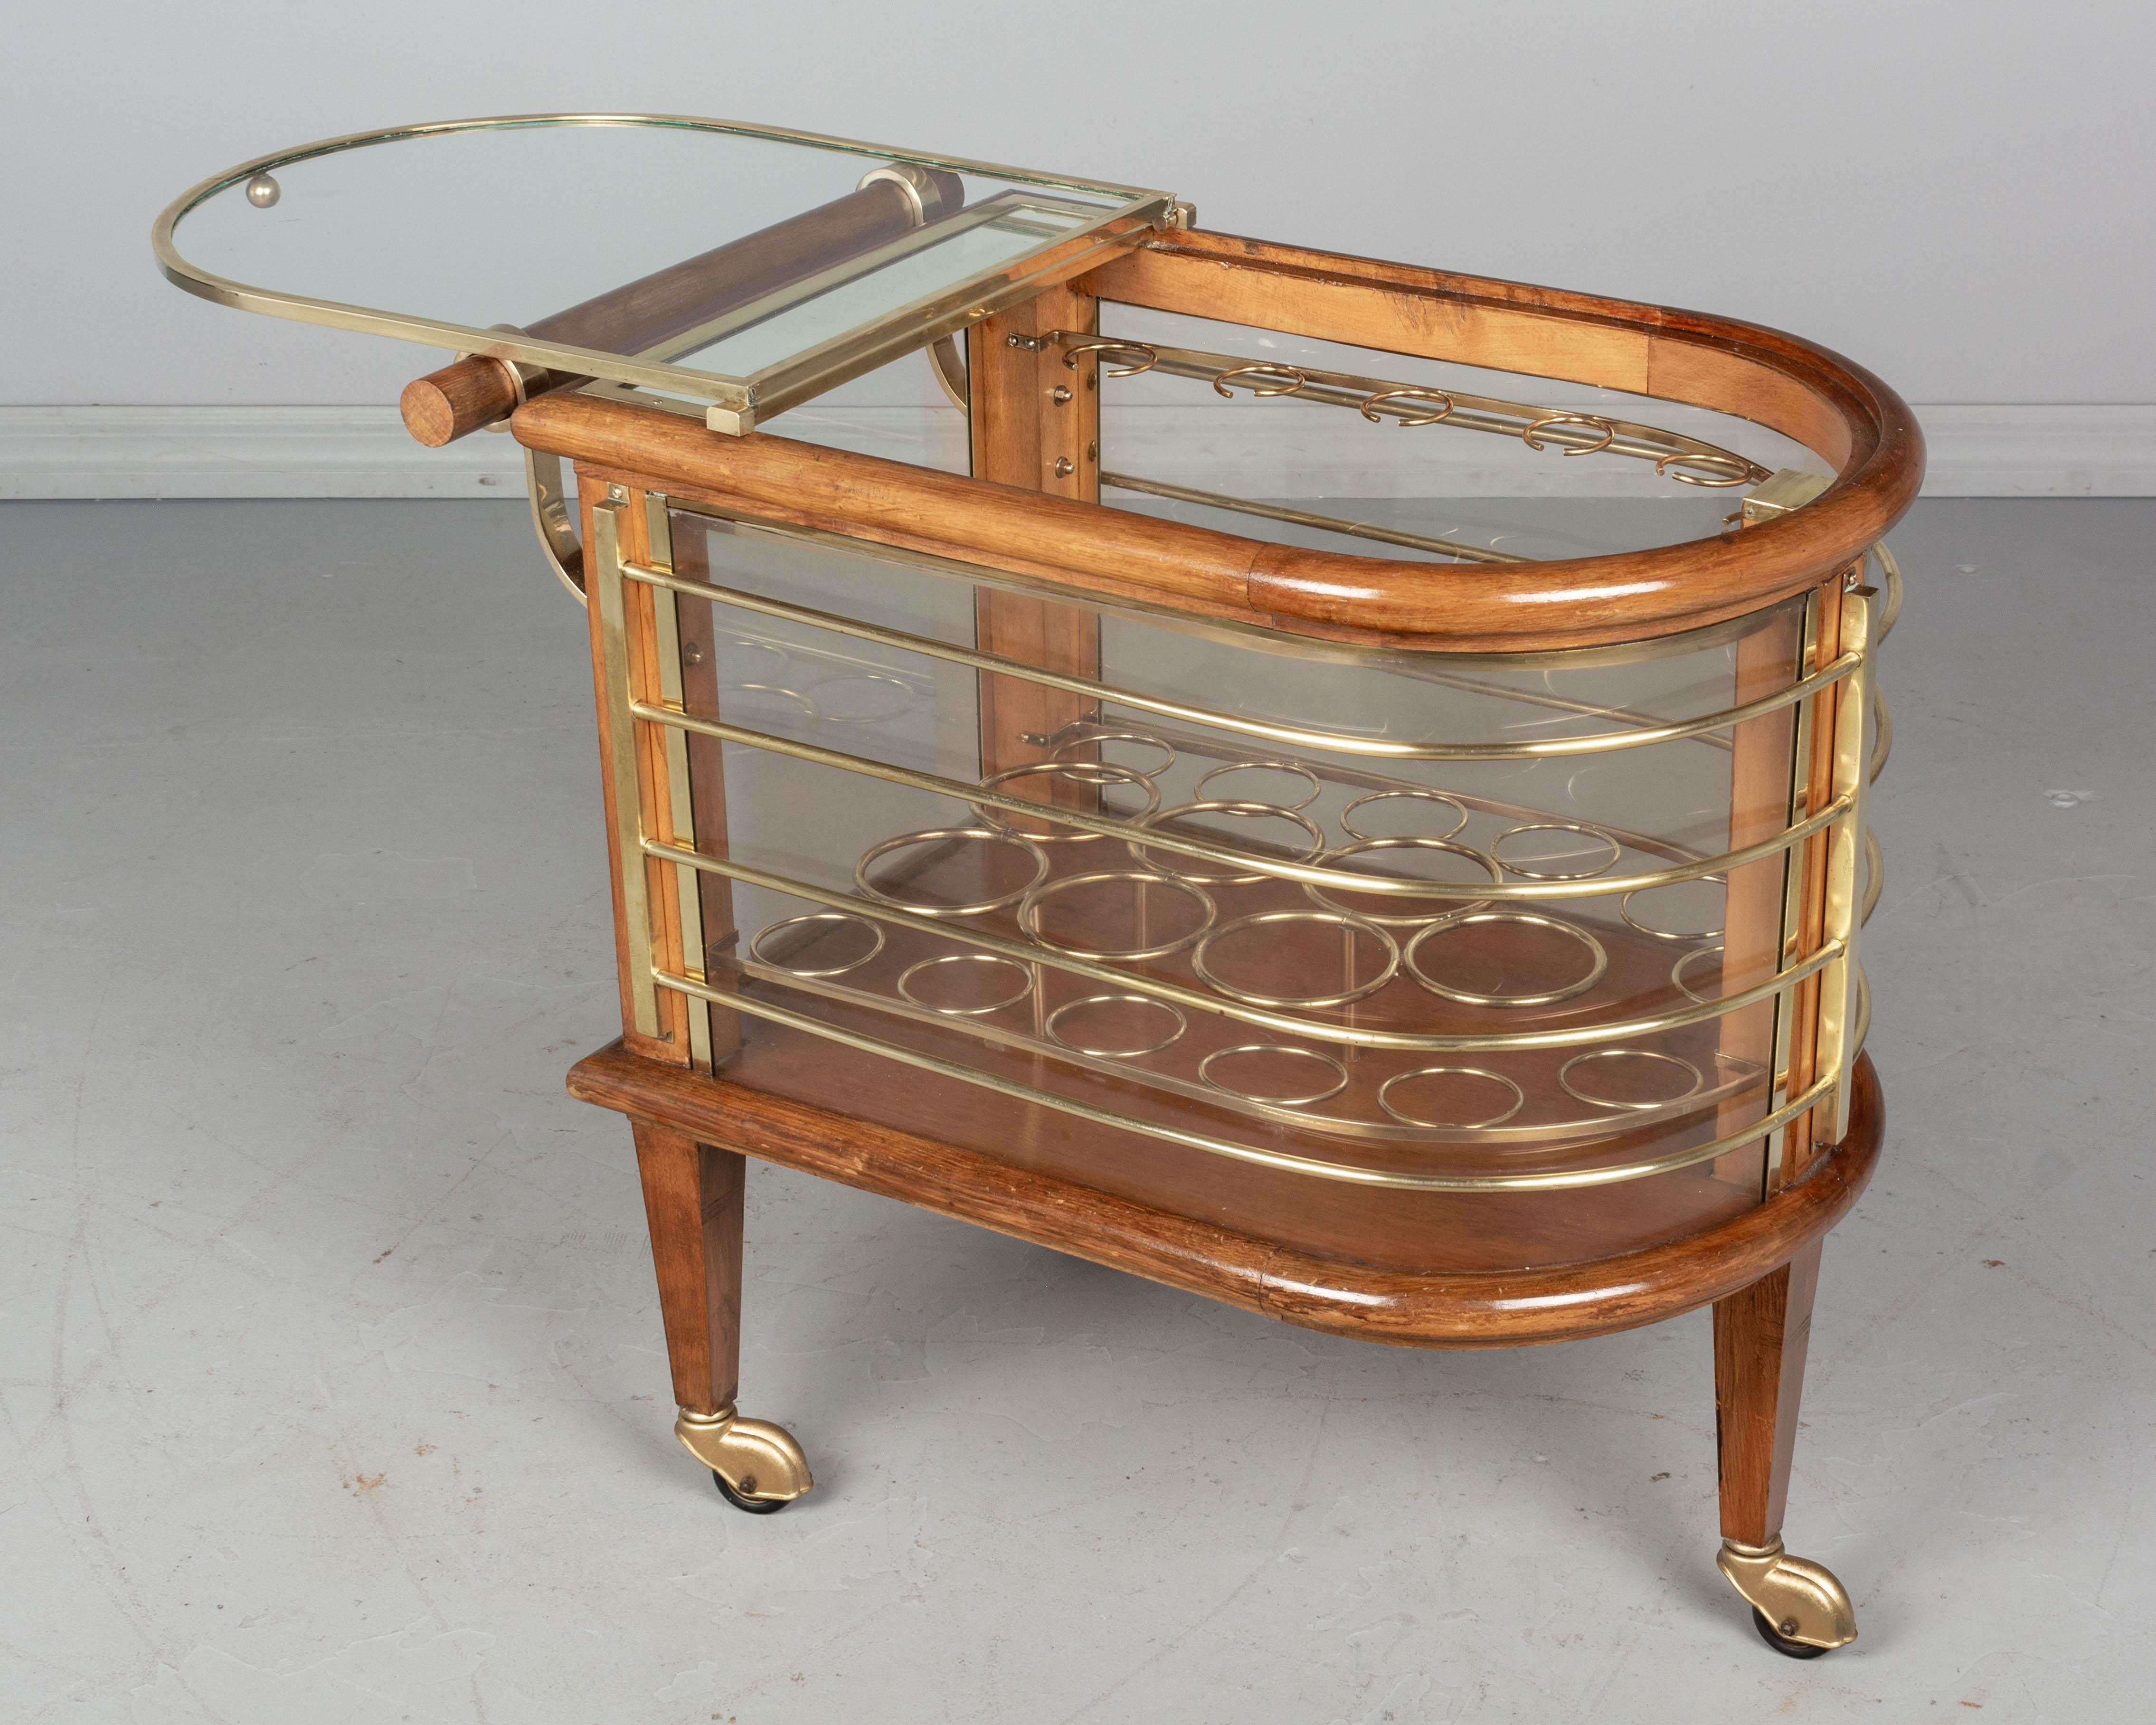 20th Century French Art Deco Style Bar Cart, or Cocktail Trolley by Louis Sognot